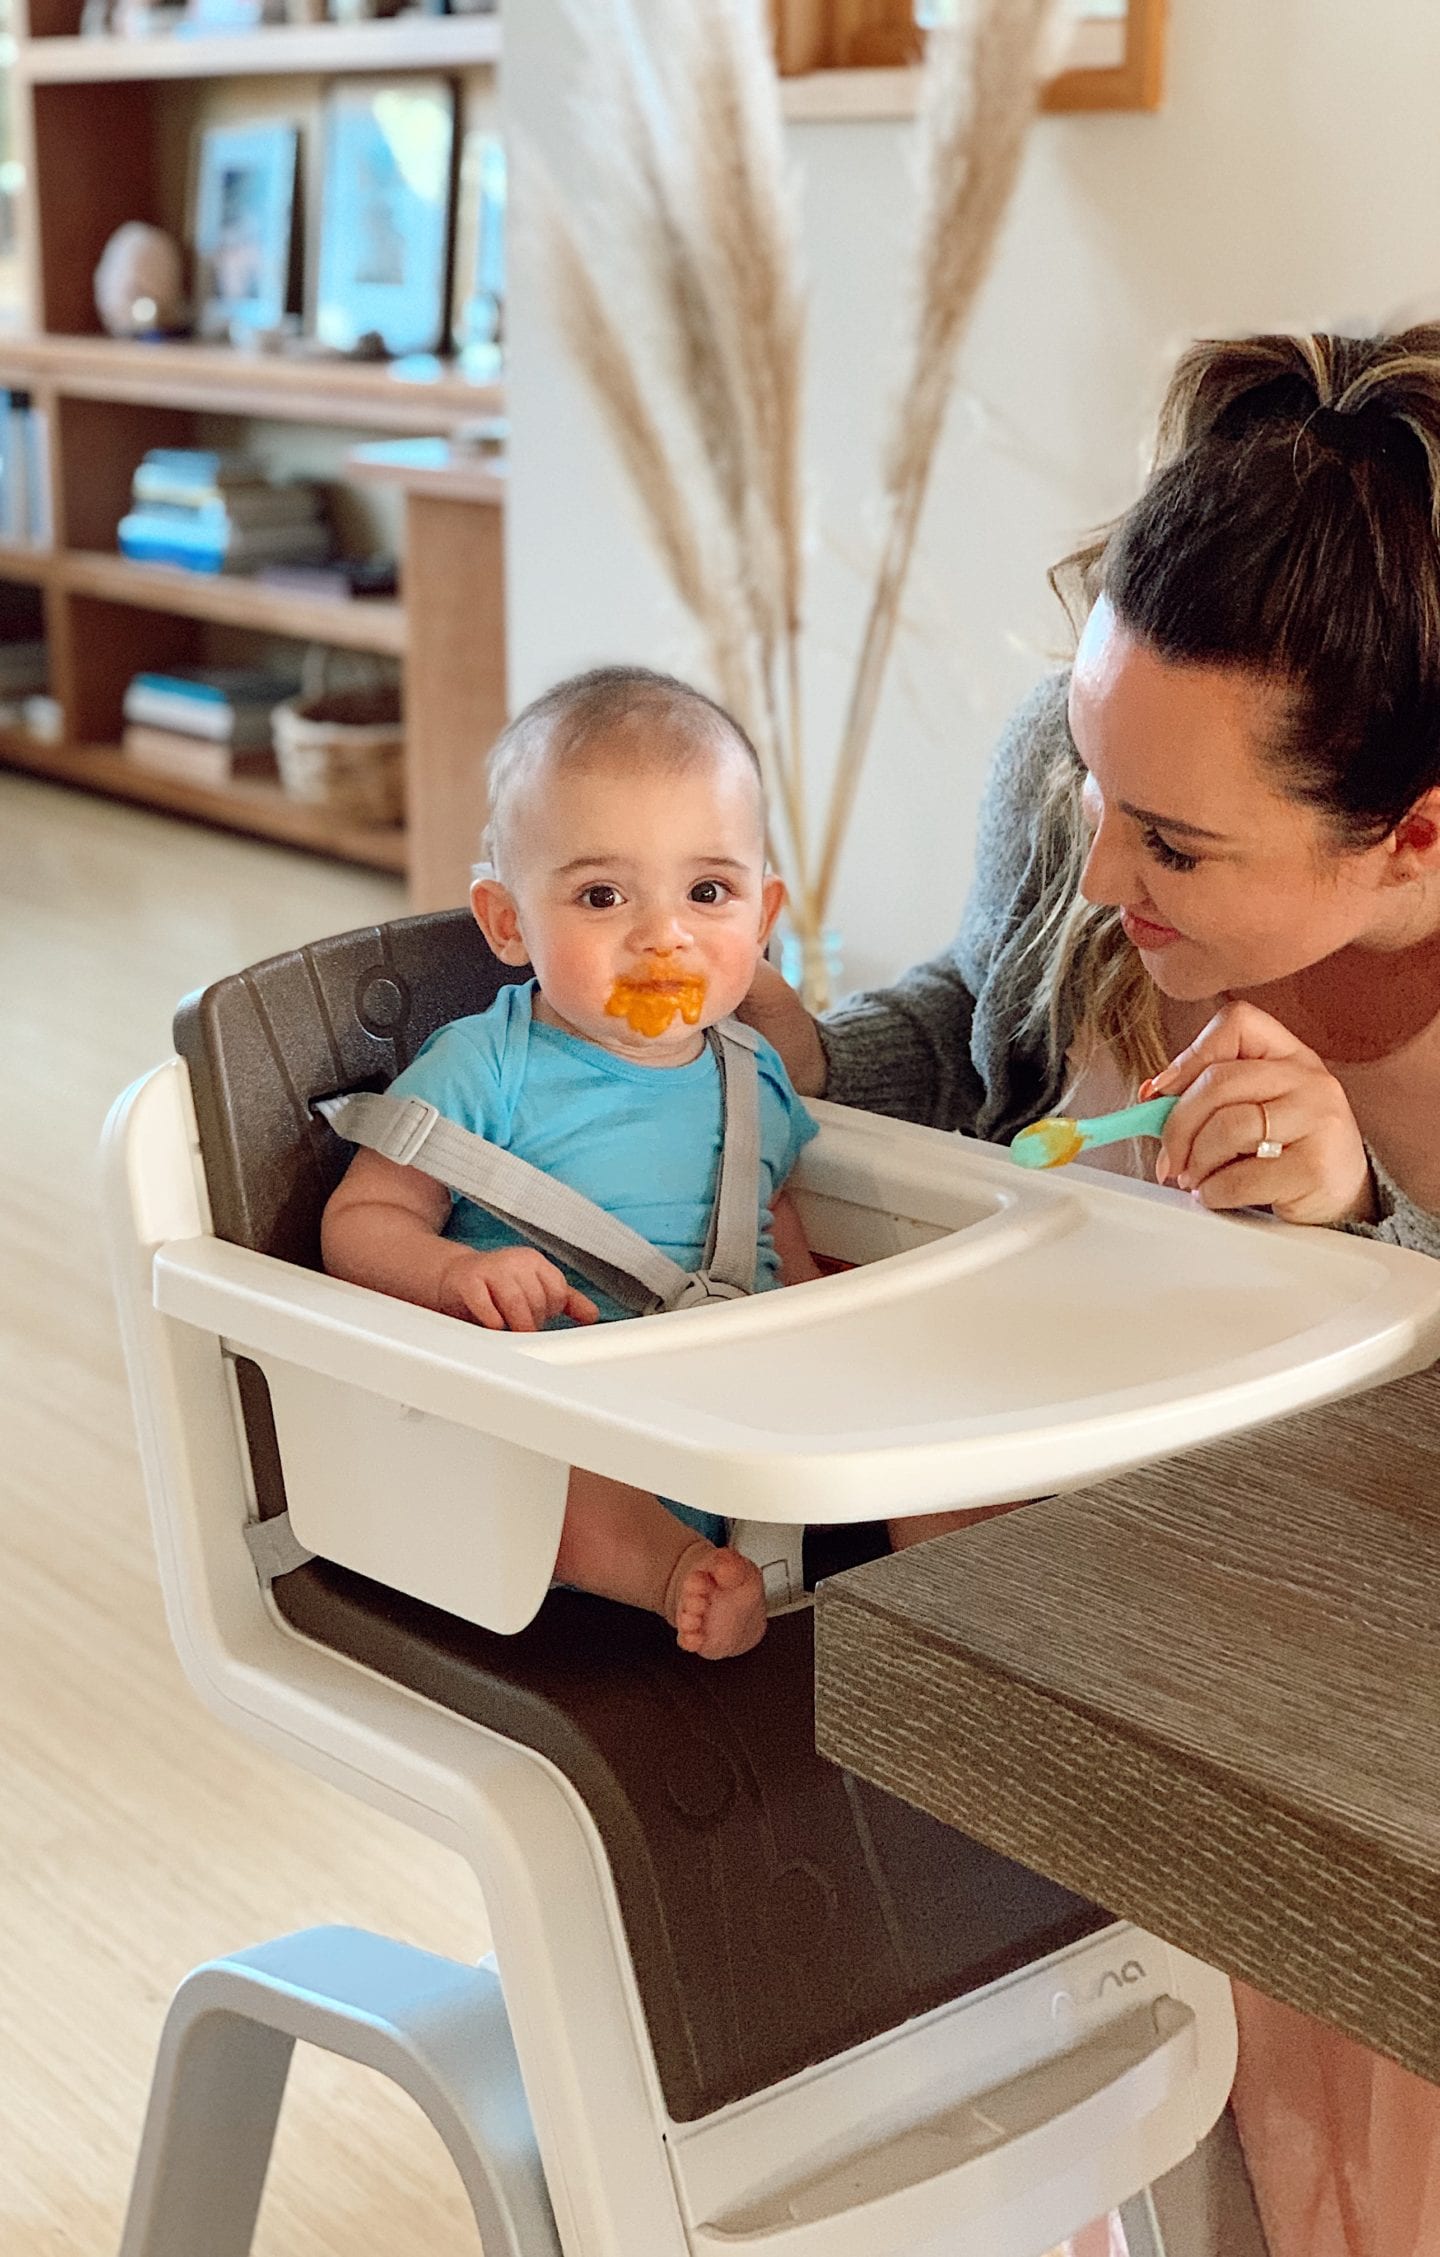 DIY baby food purees | Baby Food by popular San Francisco motherhood blog, Just Add Glam: image of a mom feeding her infant son some baby food as he sits in a Nuna ZAAZ high chair. 